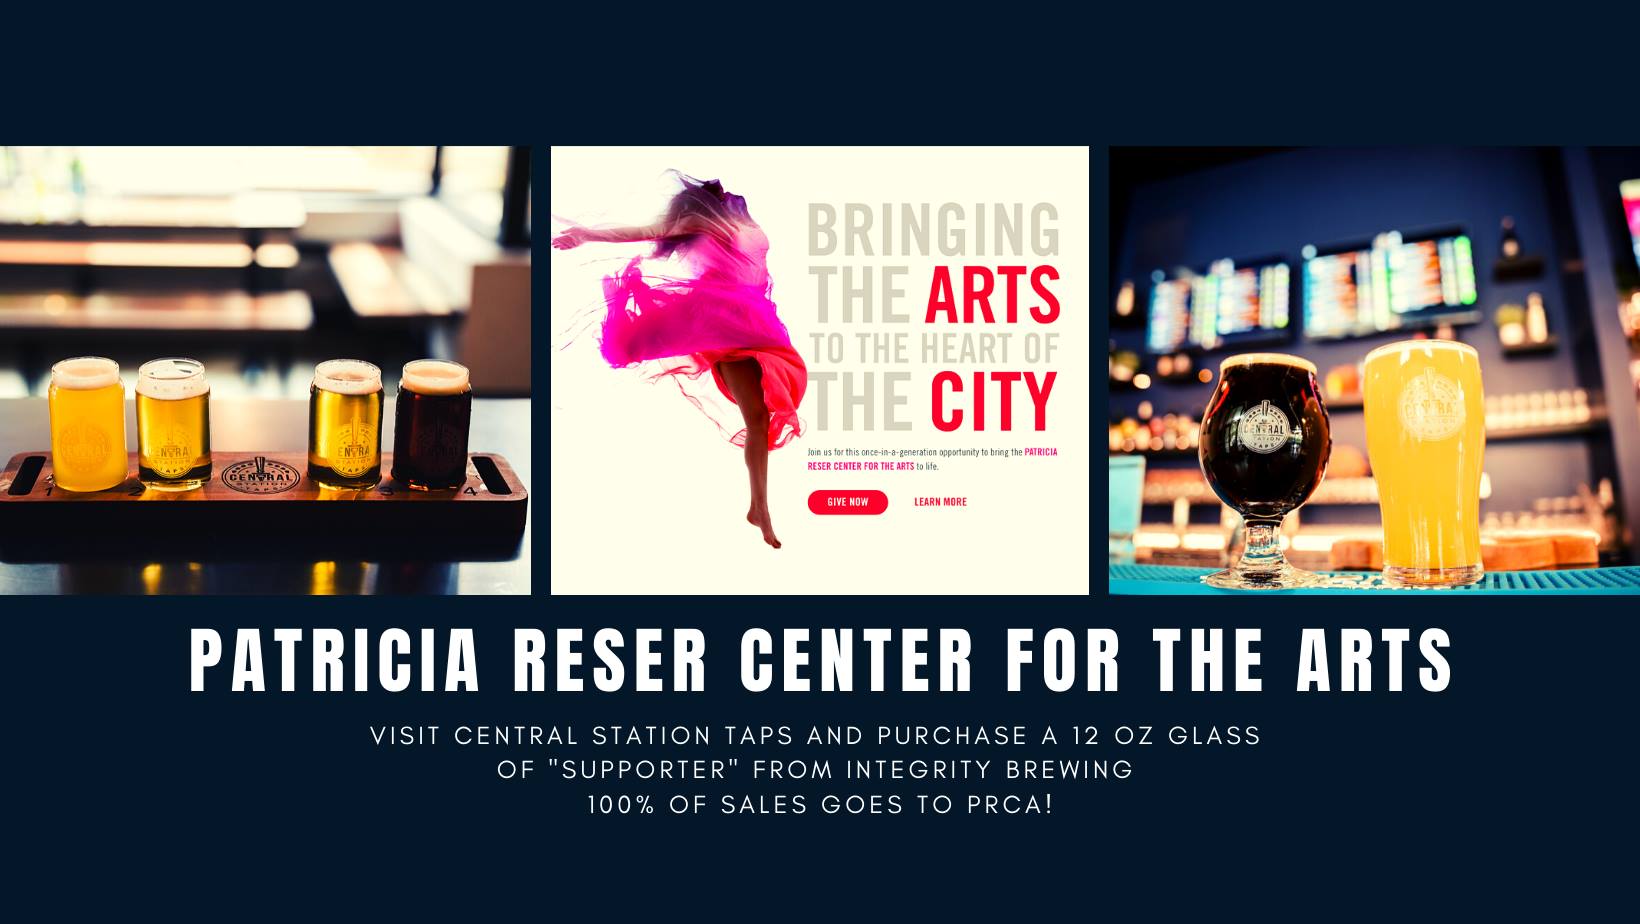 Central Station Taps & Integrity Brewing Partner with the Patricia Reser Center for the Arts